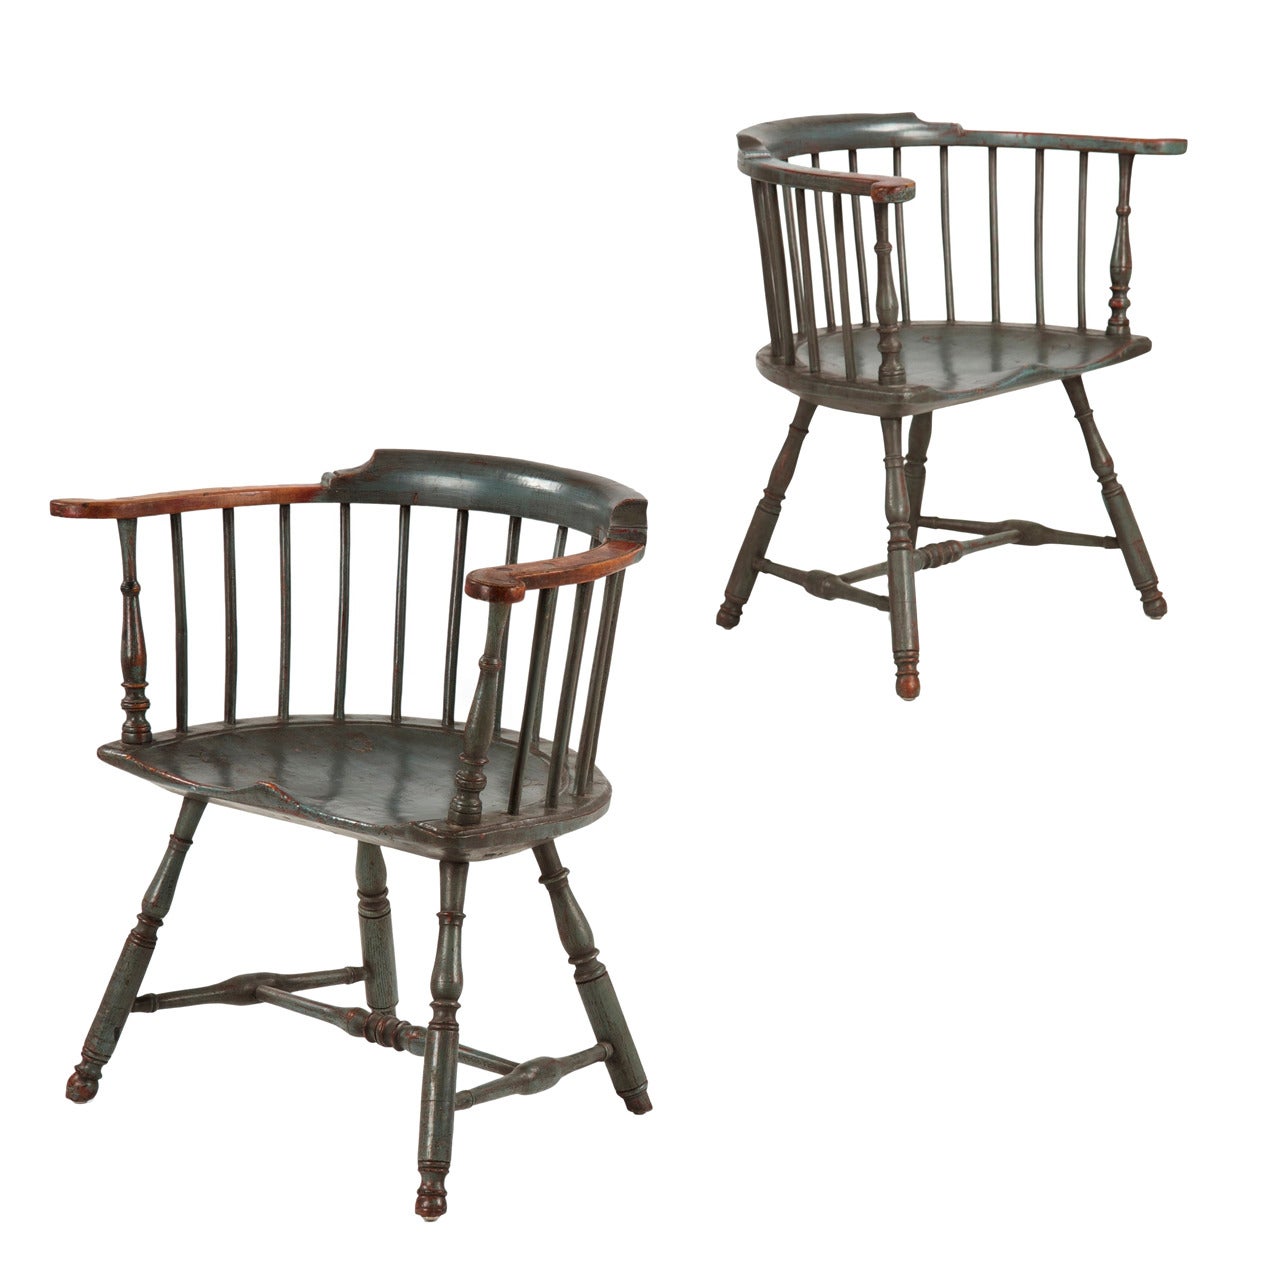 Pair of American Painted Lowback Windsor Antique Chairs, Early 20th Century